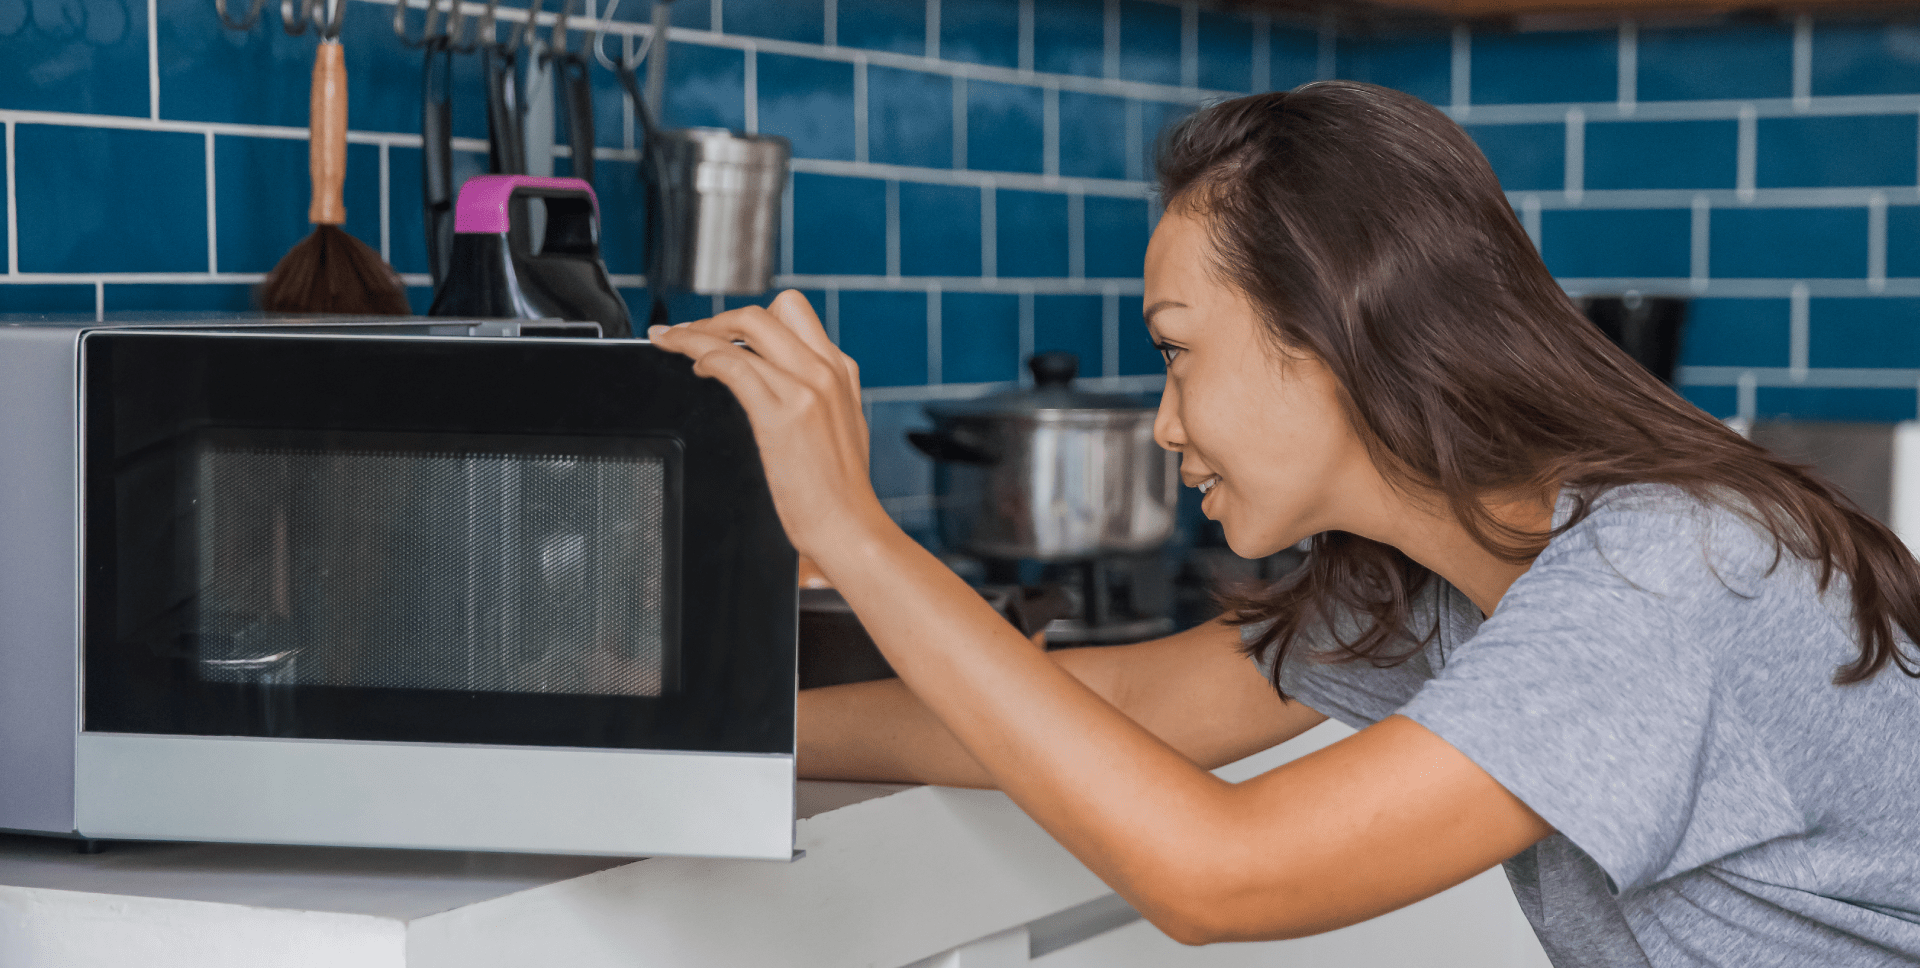 A woman reaches into a microwave to remove a container.